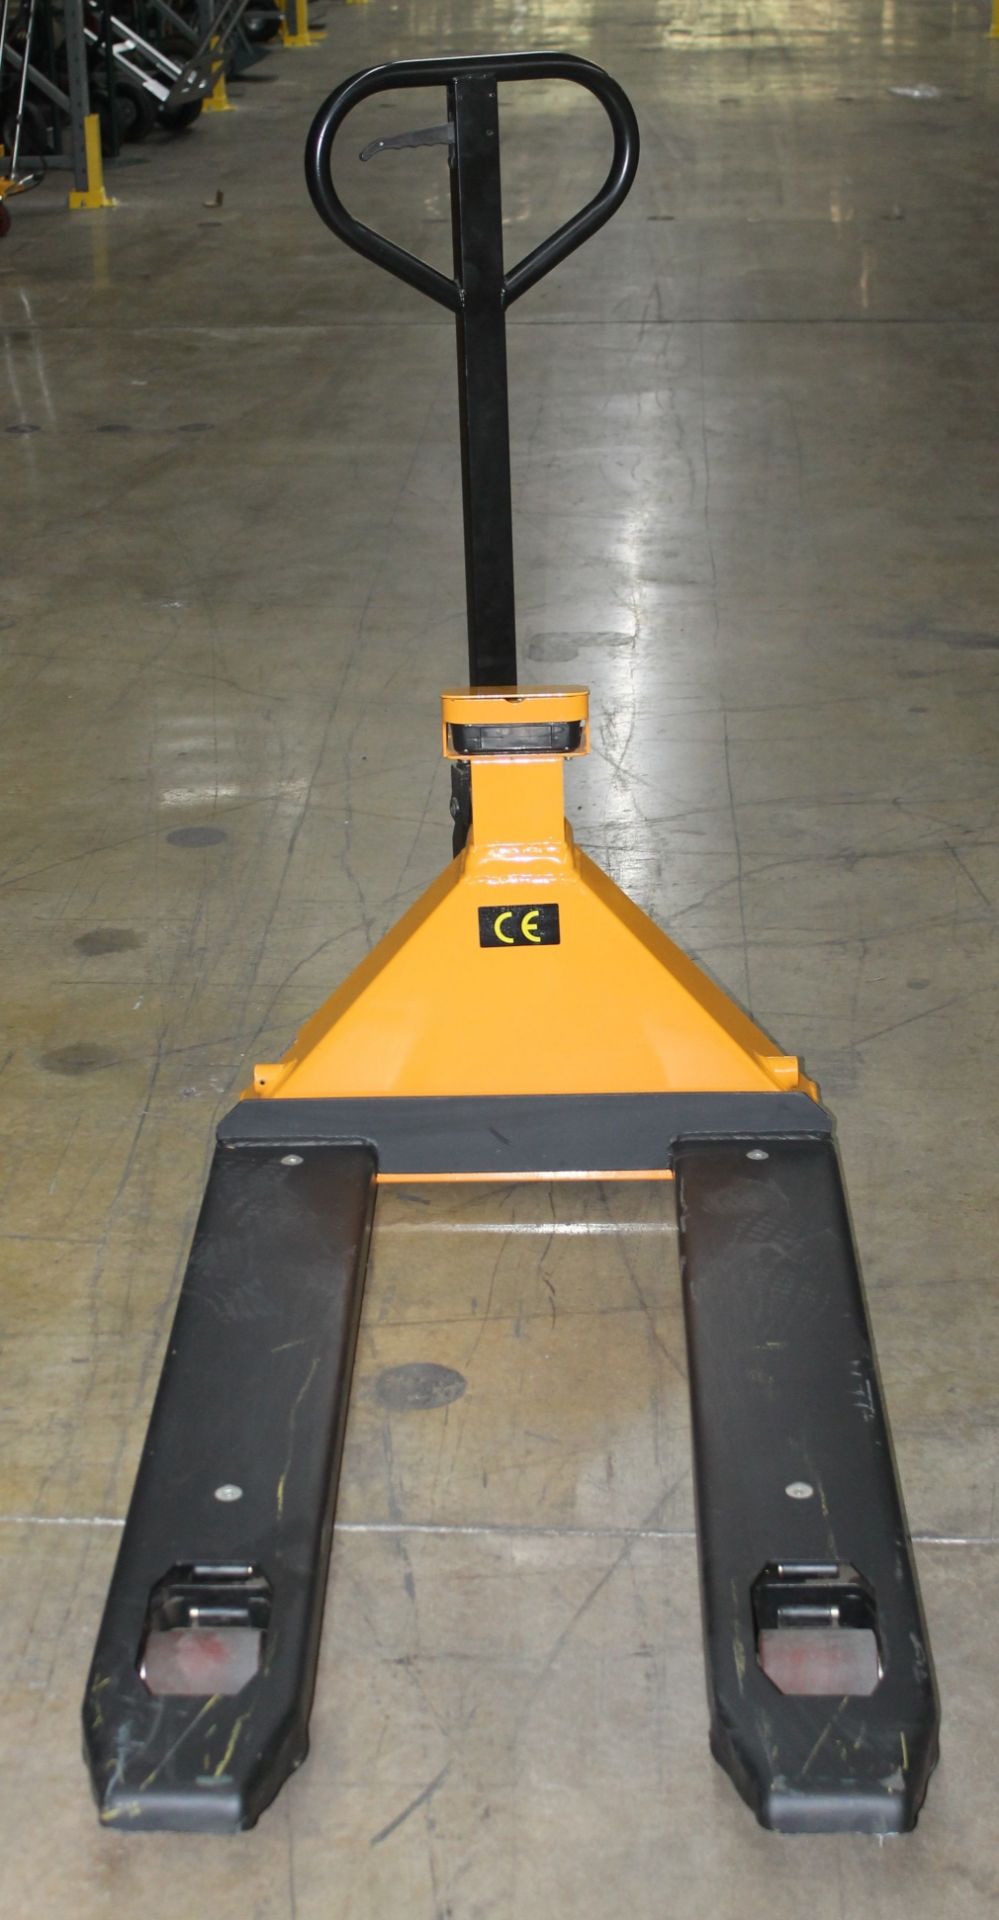 27"W X 48"L PALLET JACK WITH SCALE 5000LBS CAPACITY - Image 4 of 4